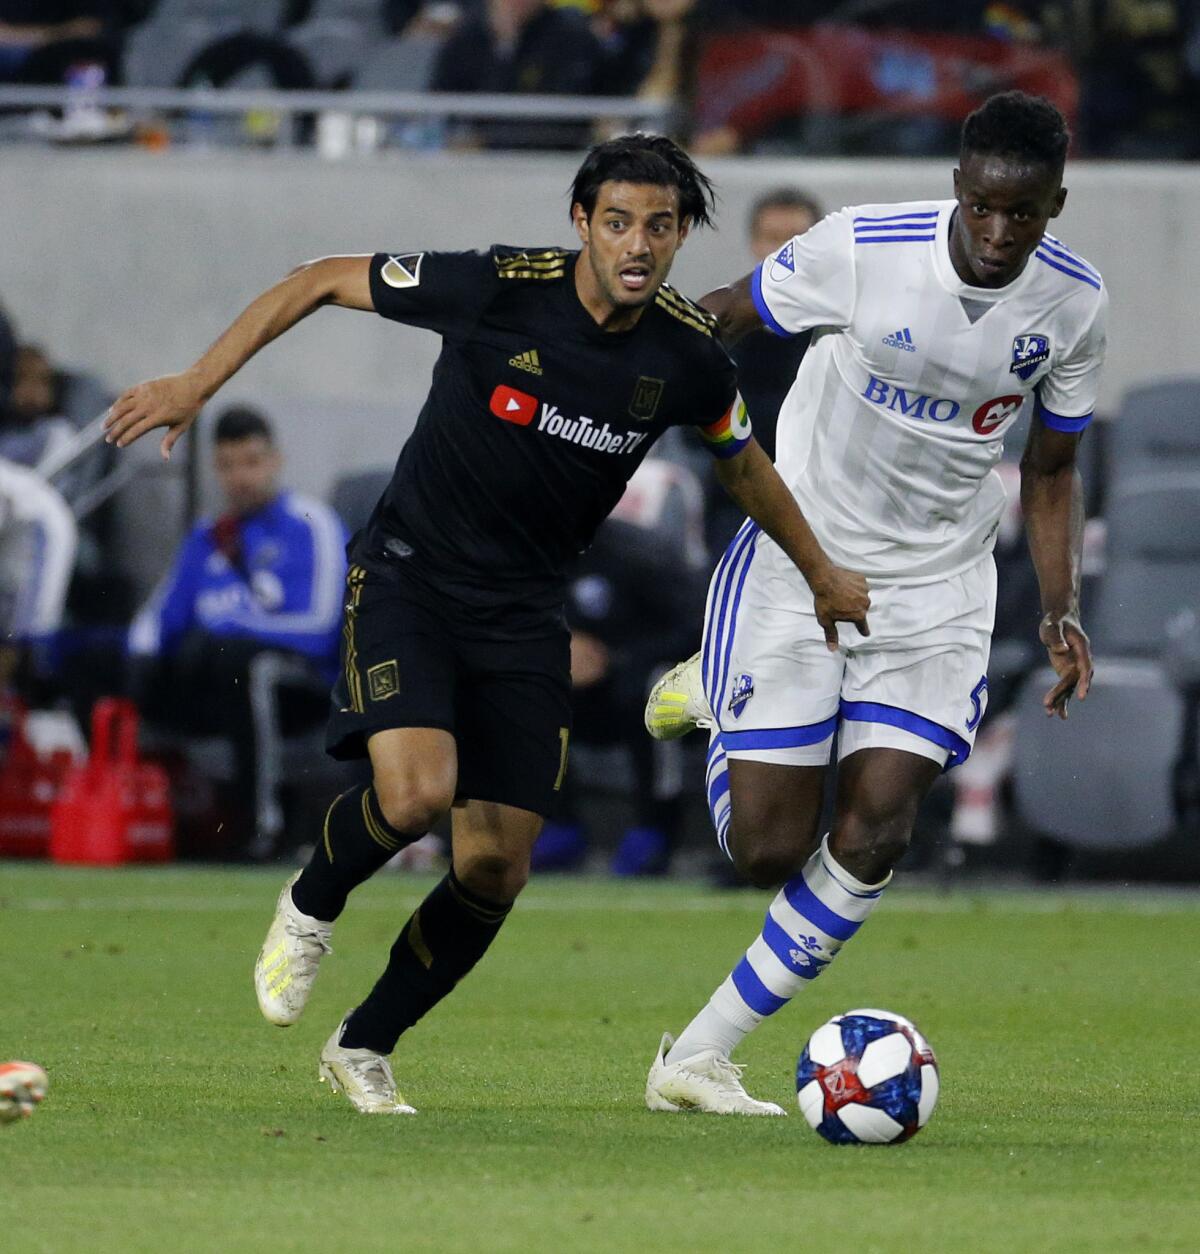 Los Angeles FC forward Carlos Vela (10) of Mexico, vies with Montreal Impact defender Zakaria Diallo (5) of France, in an MLS soccer match between Los Angeles FC and Montreal Impact in Los Angeles, Friday, May 24, 2019. LAFC won 4-2.